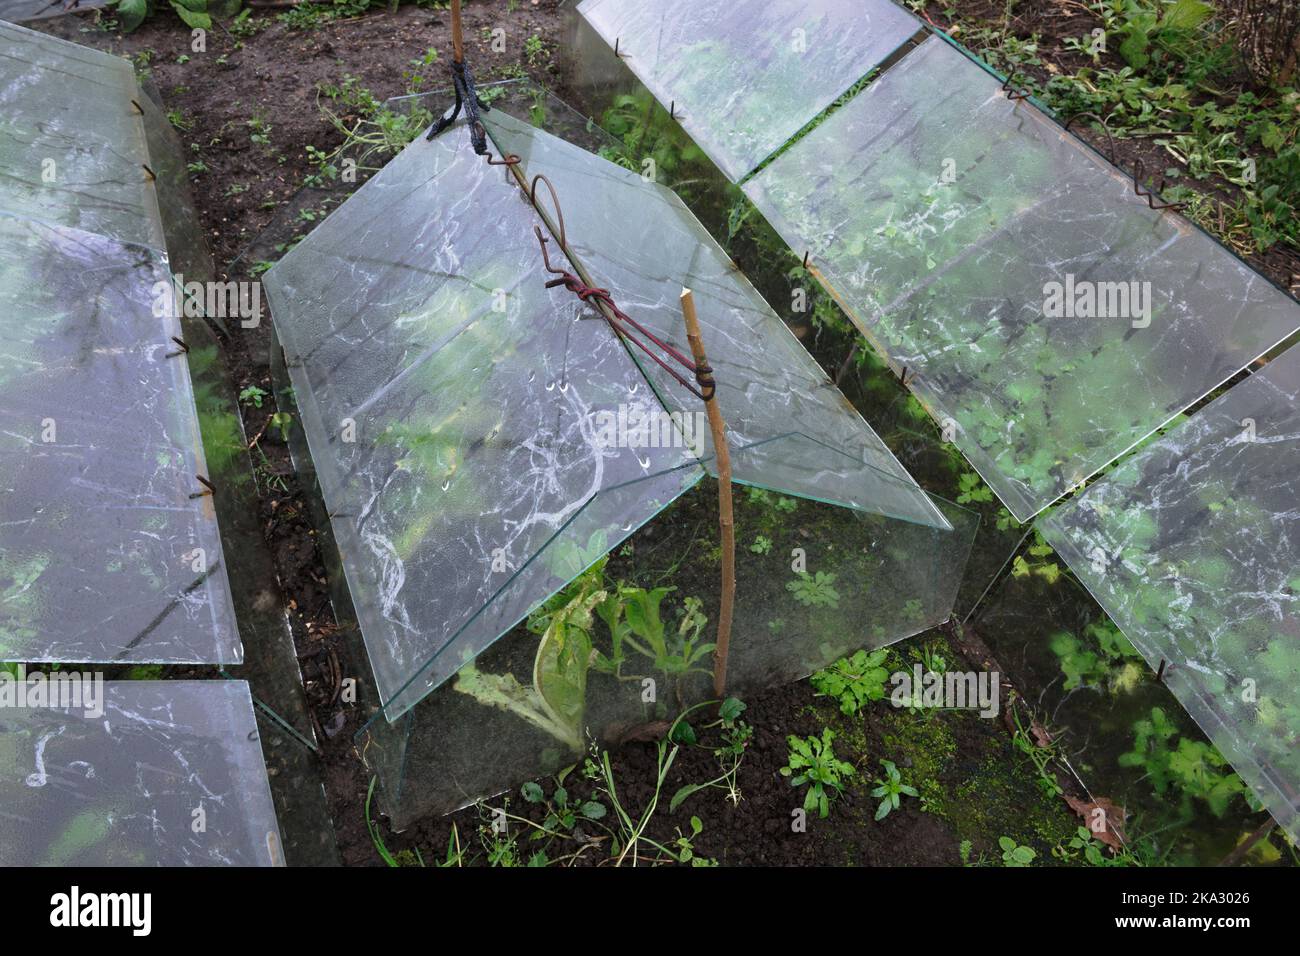 Rows of vintage, low barn cloches used to protect over wintering lettuce & parsley. Condensation caused by closed top vents. Slug trails on glass. Stock Photo